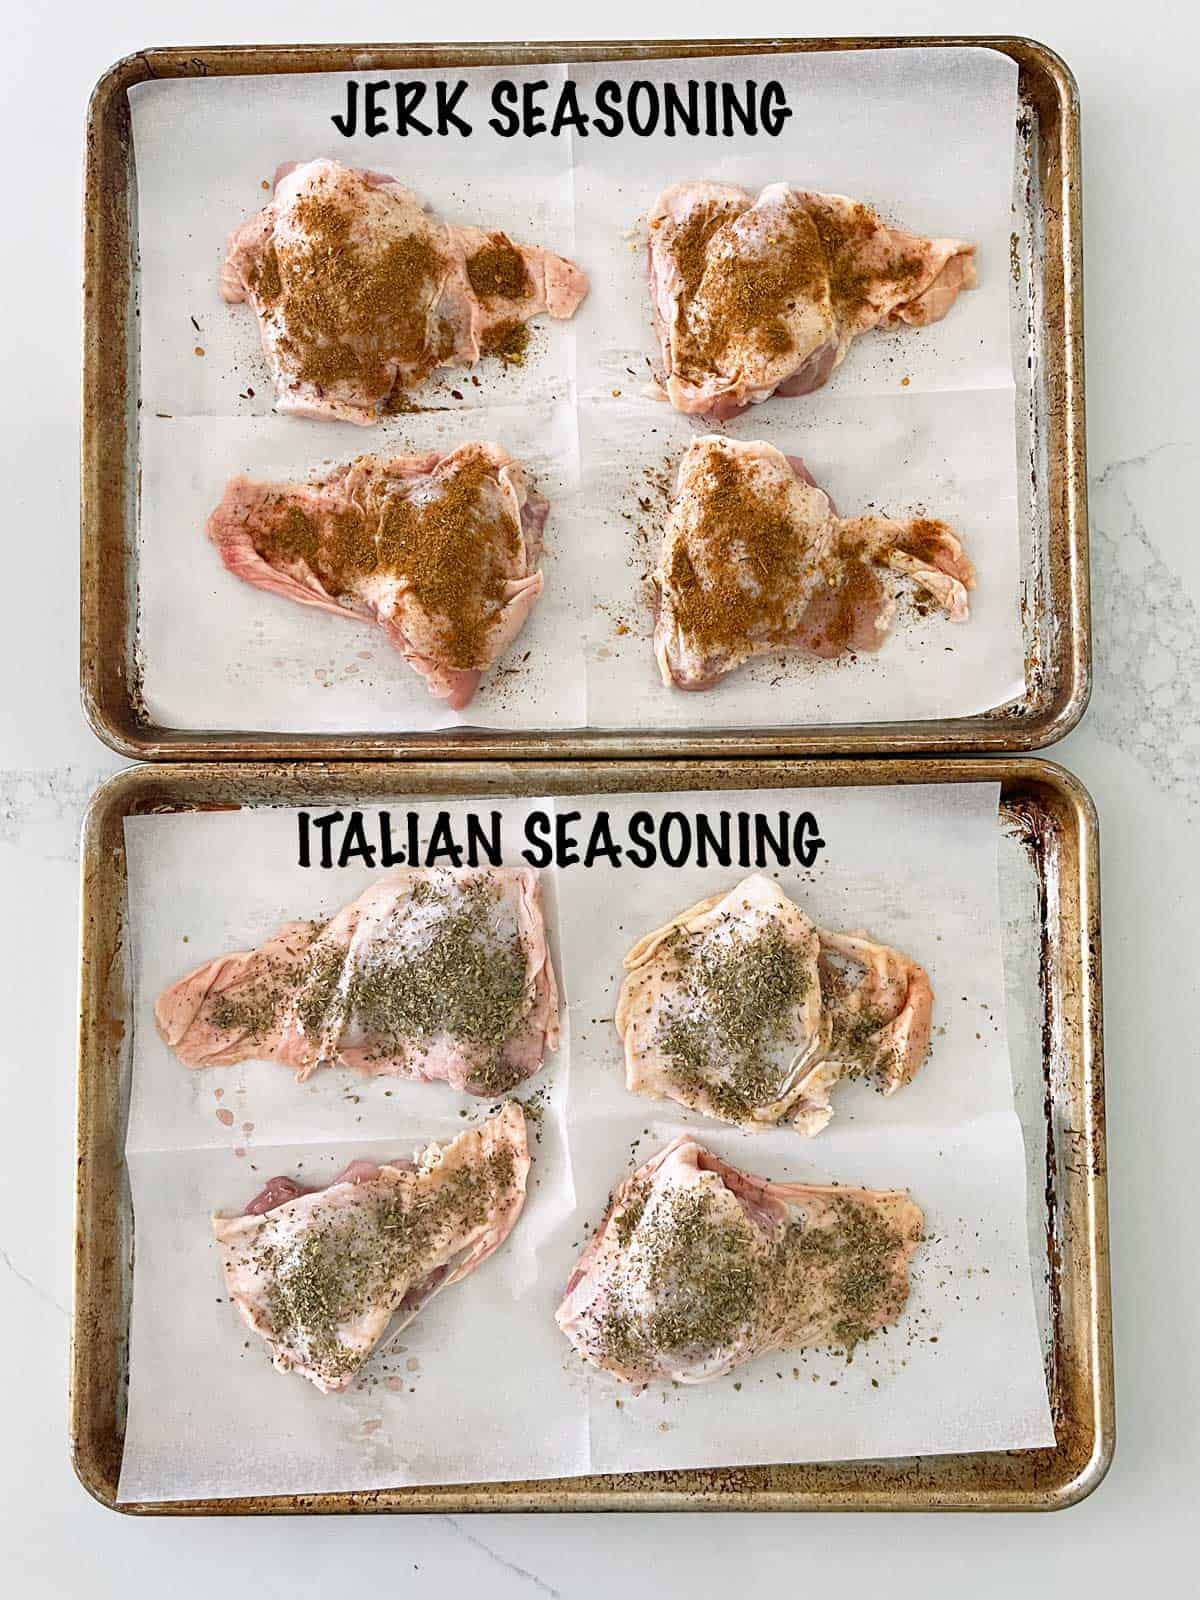 Two pans with seasoned chicken thighs: one with jerk seasoning and one with Italian seasoning.